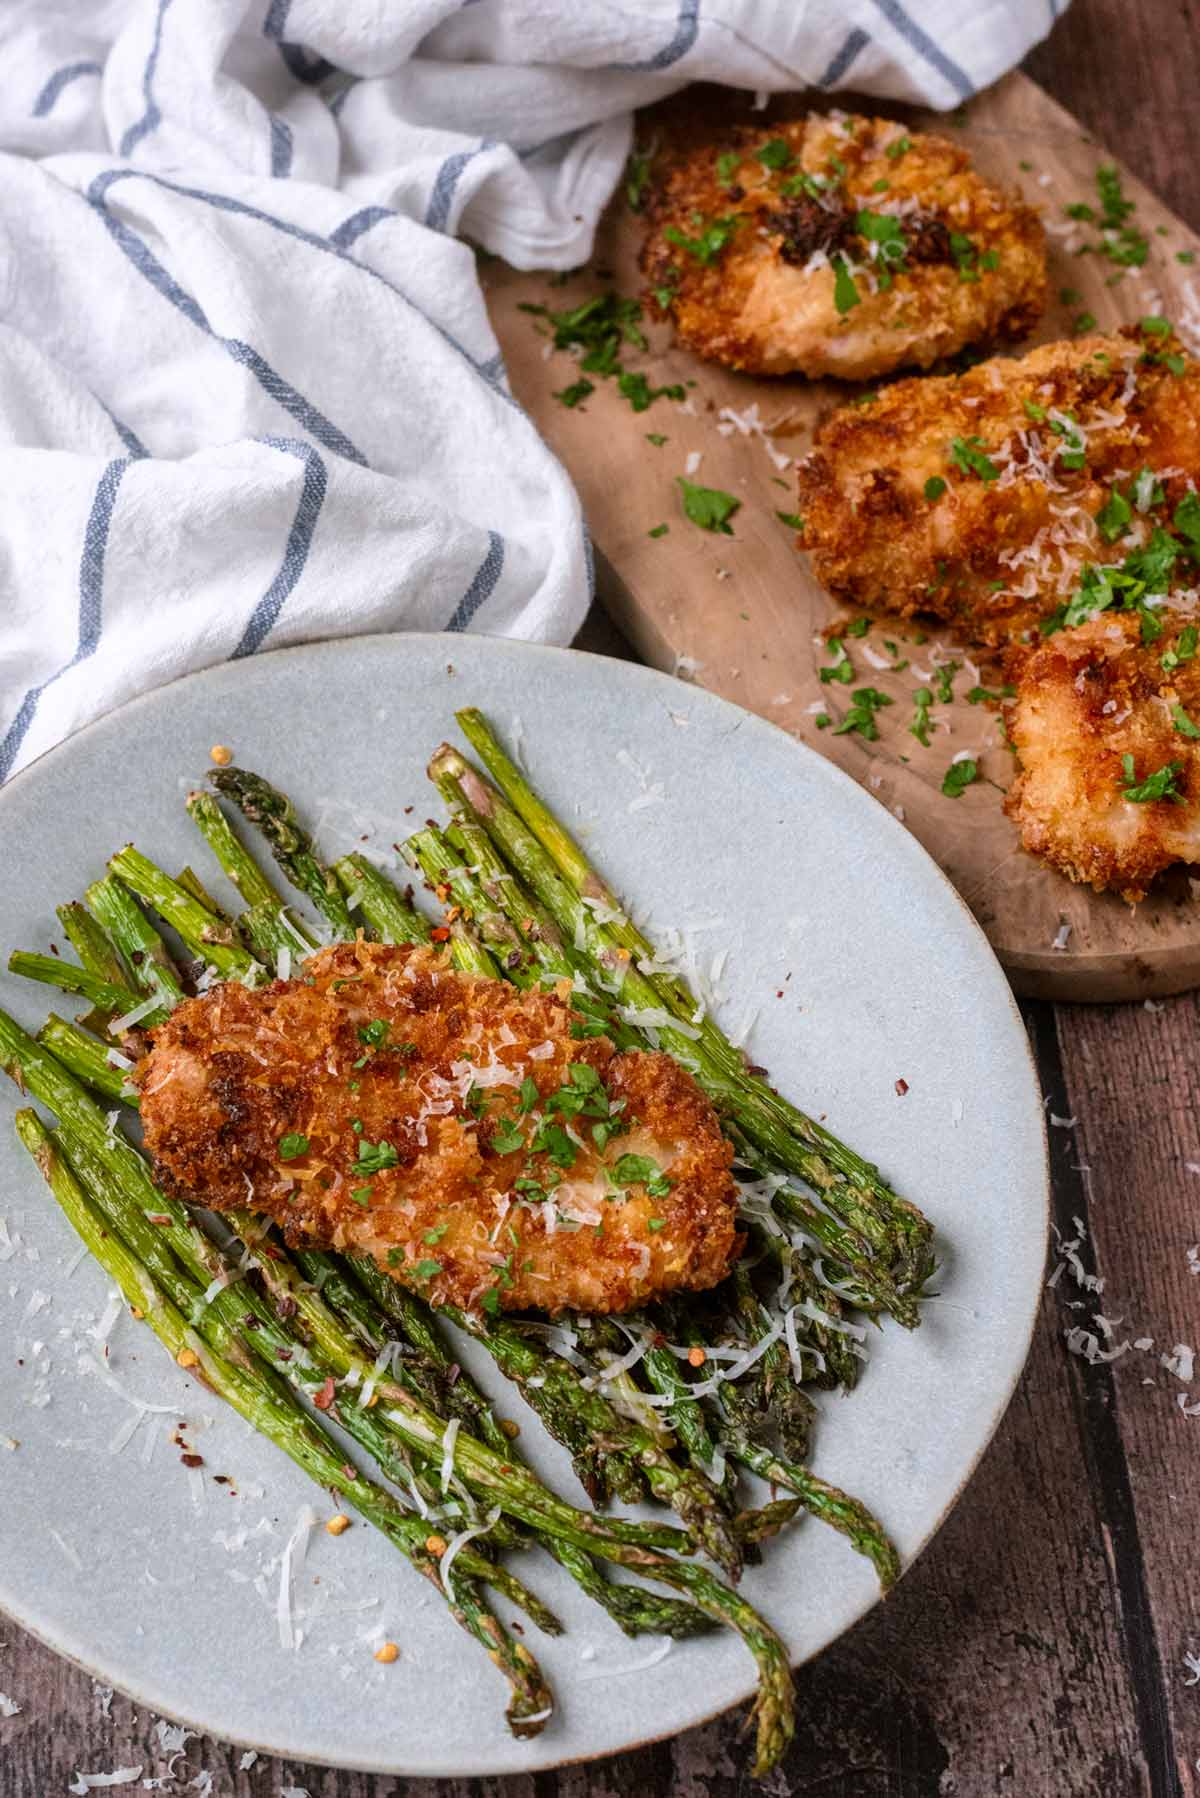 Crusted chicken breast on a plate with some cooked asparagus. More chicken is in the background.